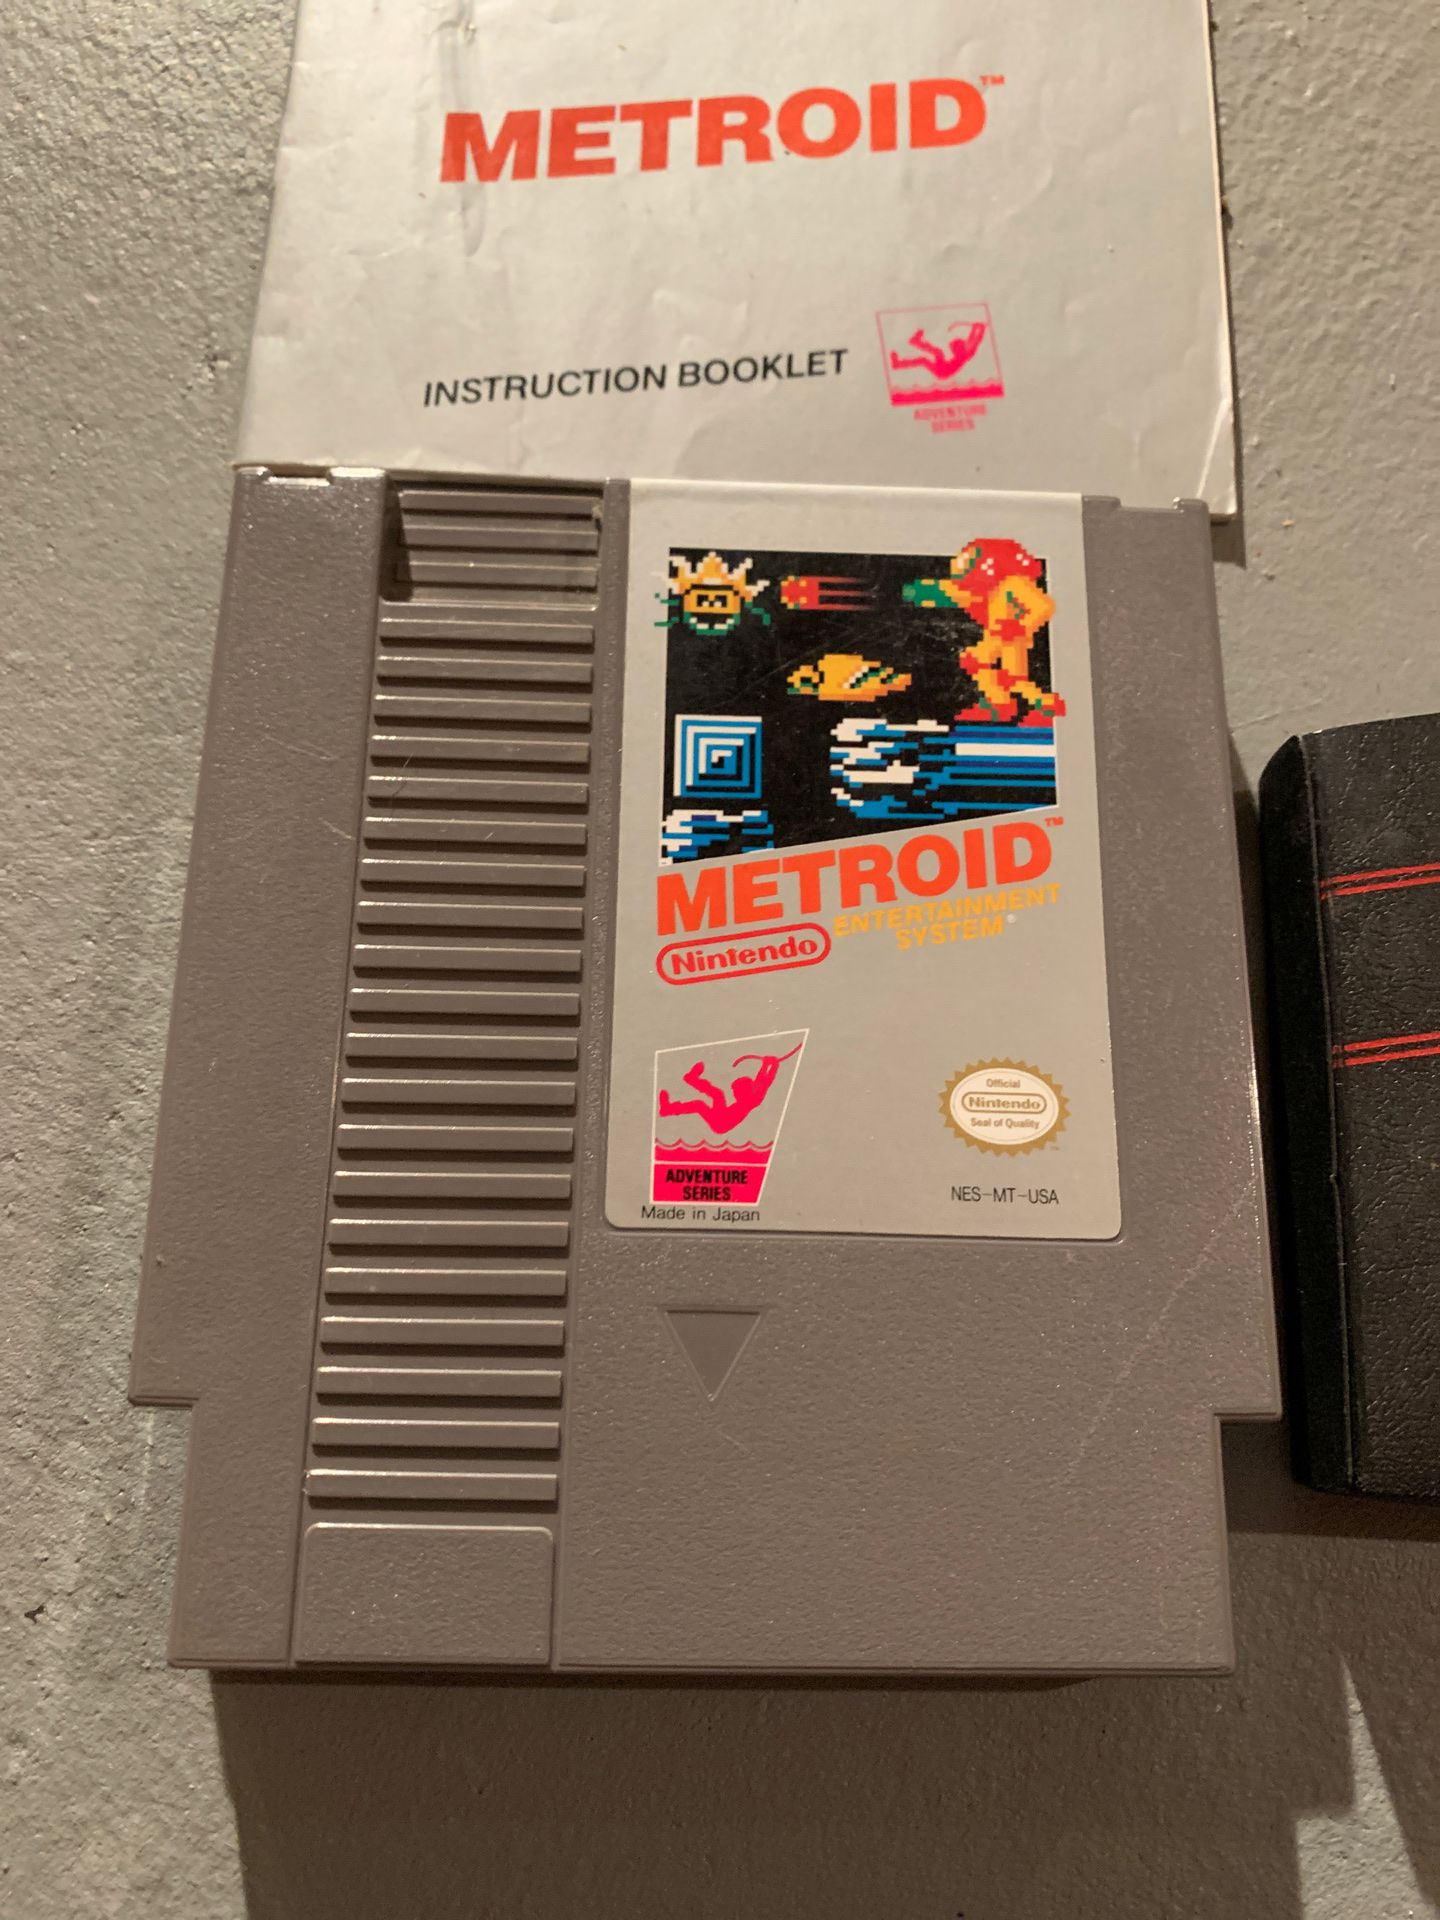 Nintendo Metroid adventure series. With instruction book and case